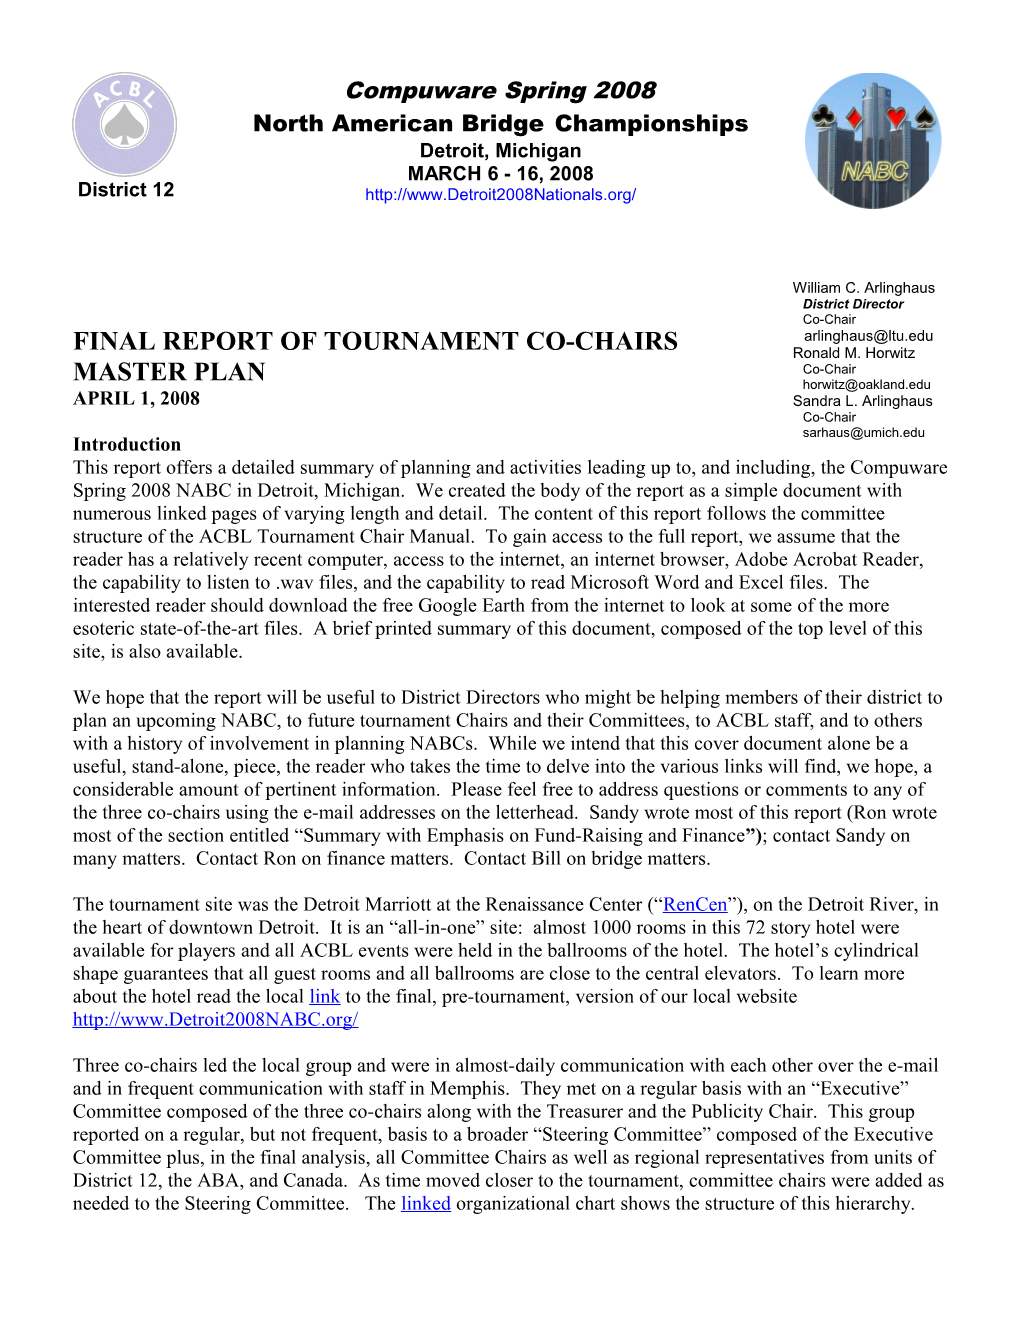 Final Report of Tournament Co-Chairs